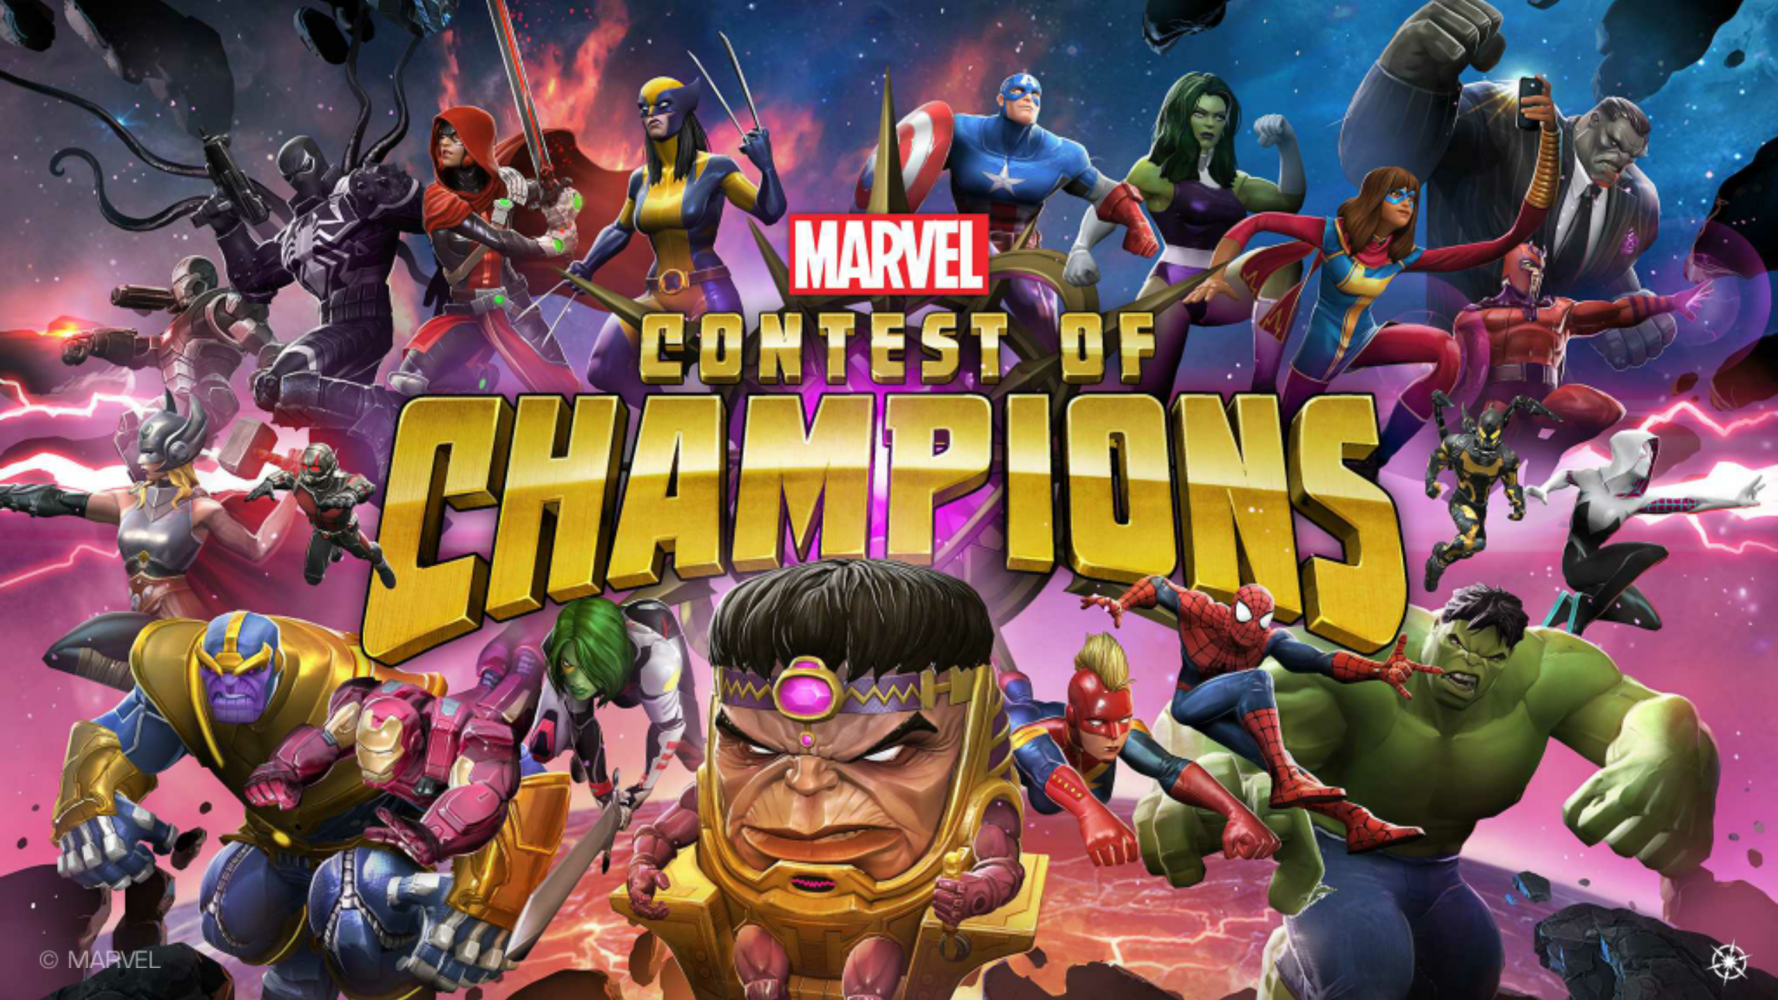 Conquest Of Champions HD wallpapers, Desktop wallpaper - most viewed